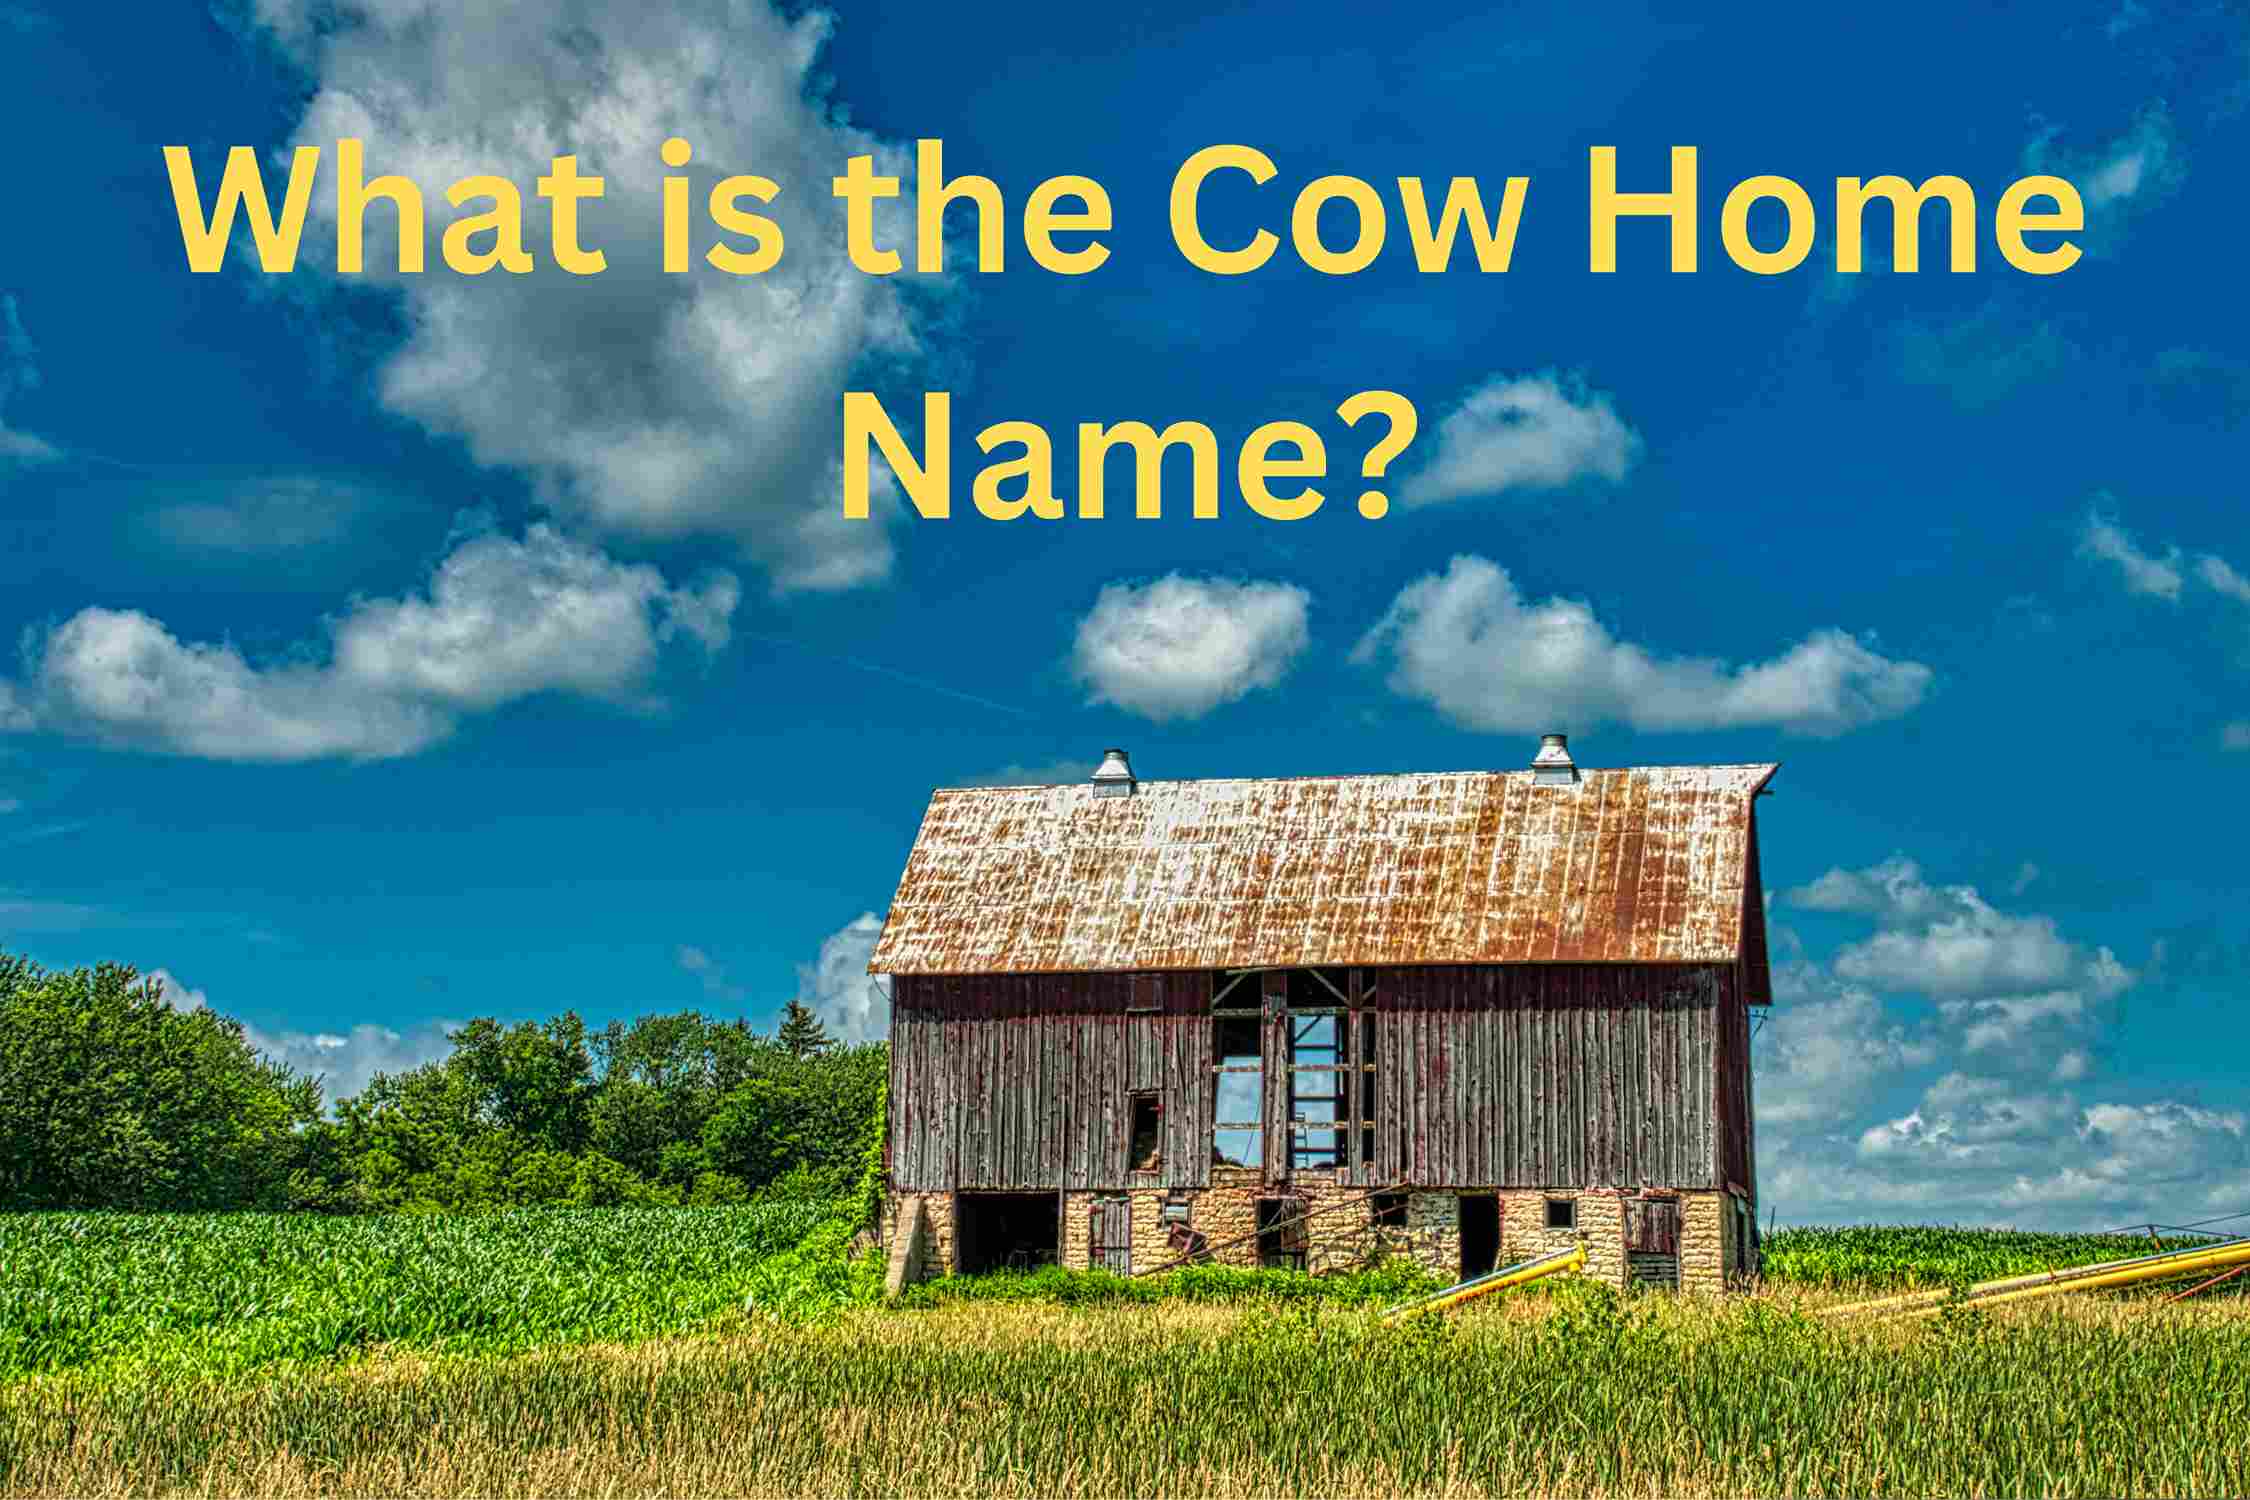 What is the Cow Home Name?